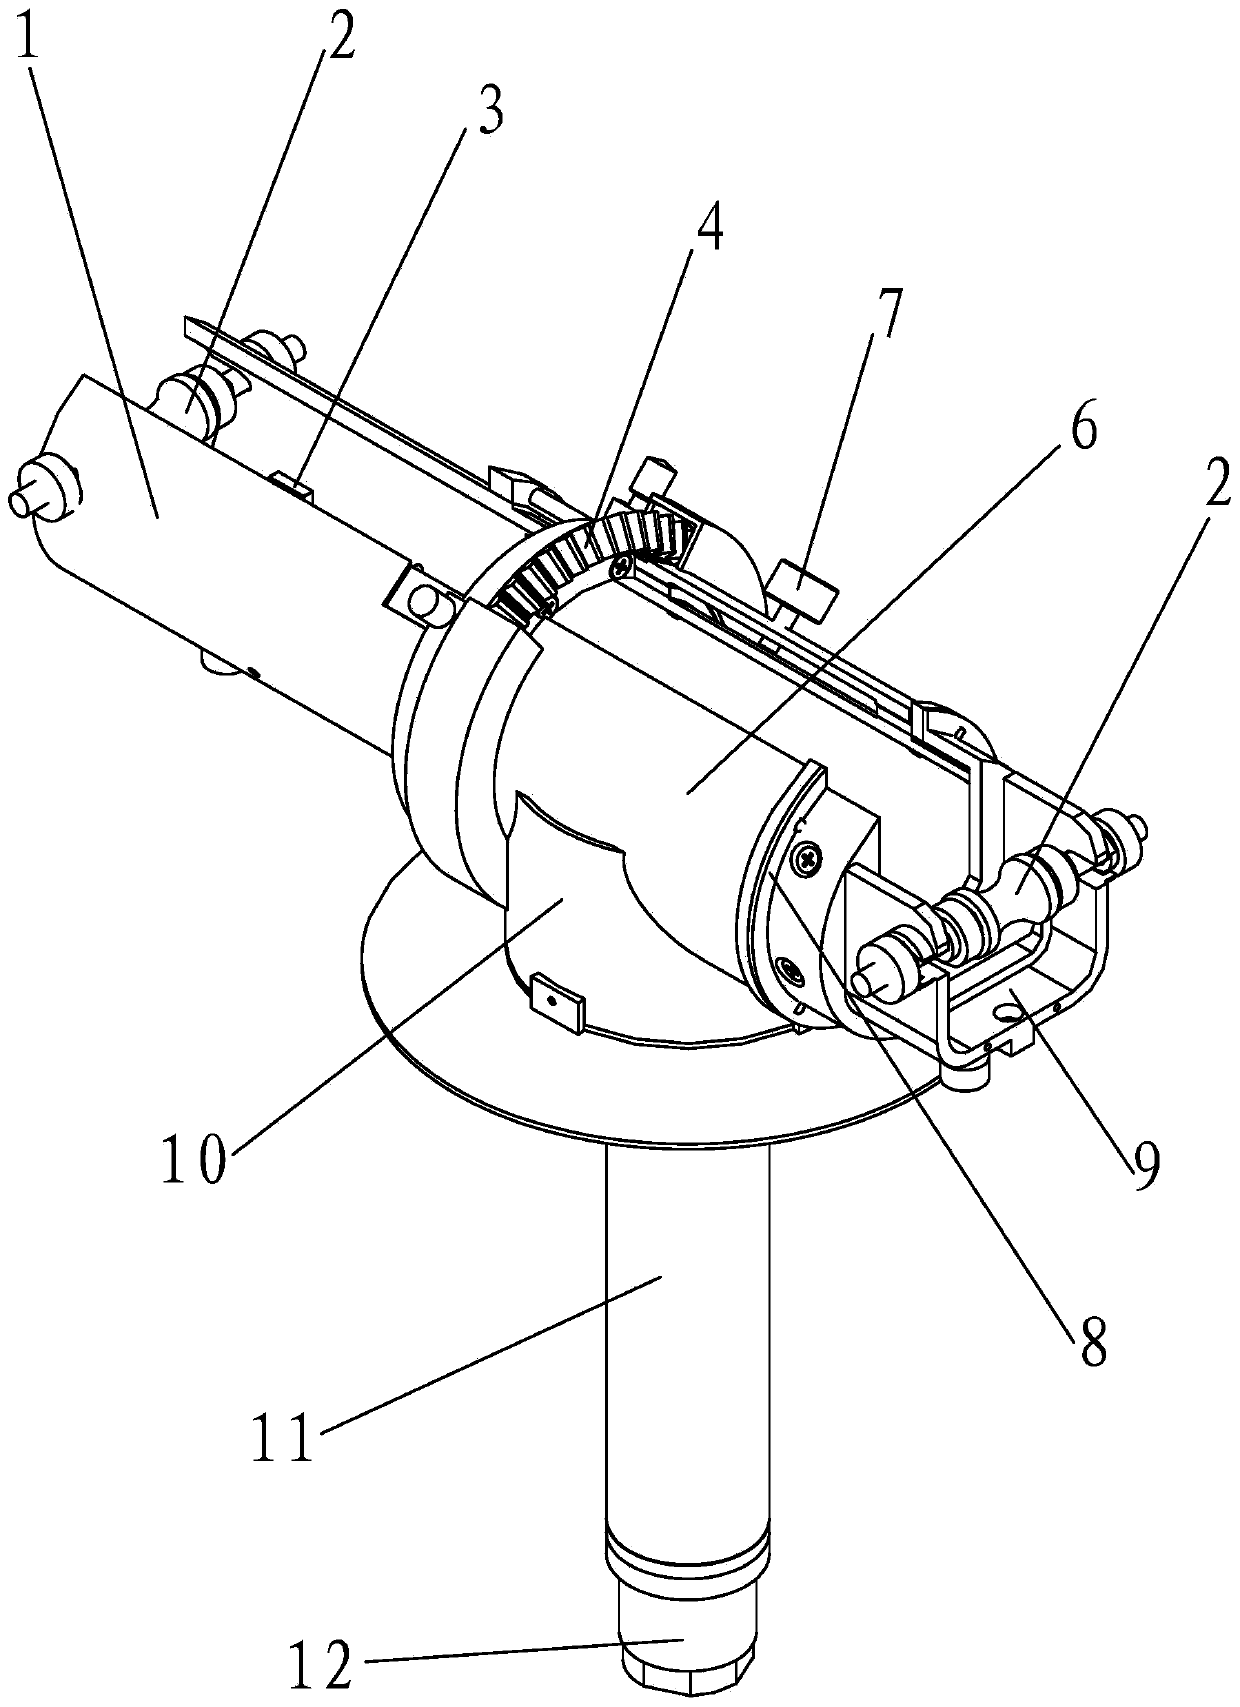 Portable winding device